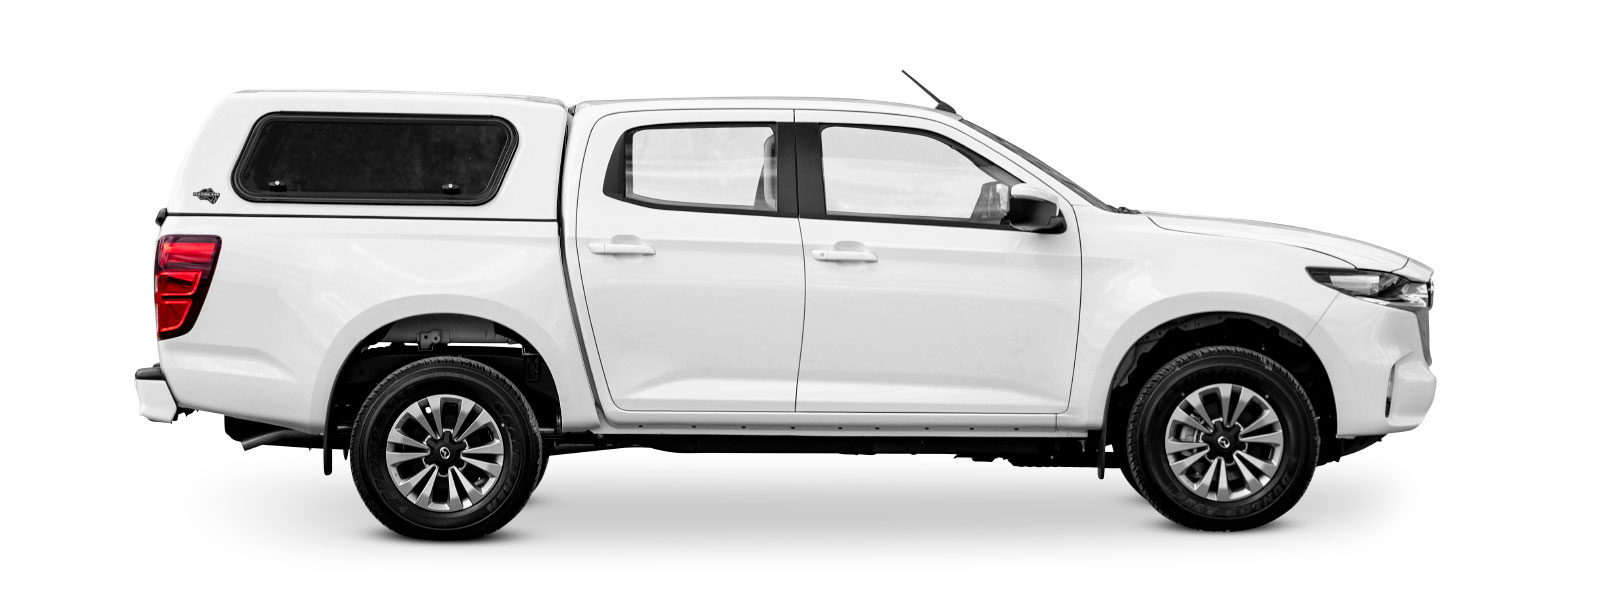 FlexiTrade canopy to suit Mazda BT-50 dual cab ute